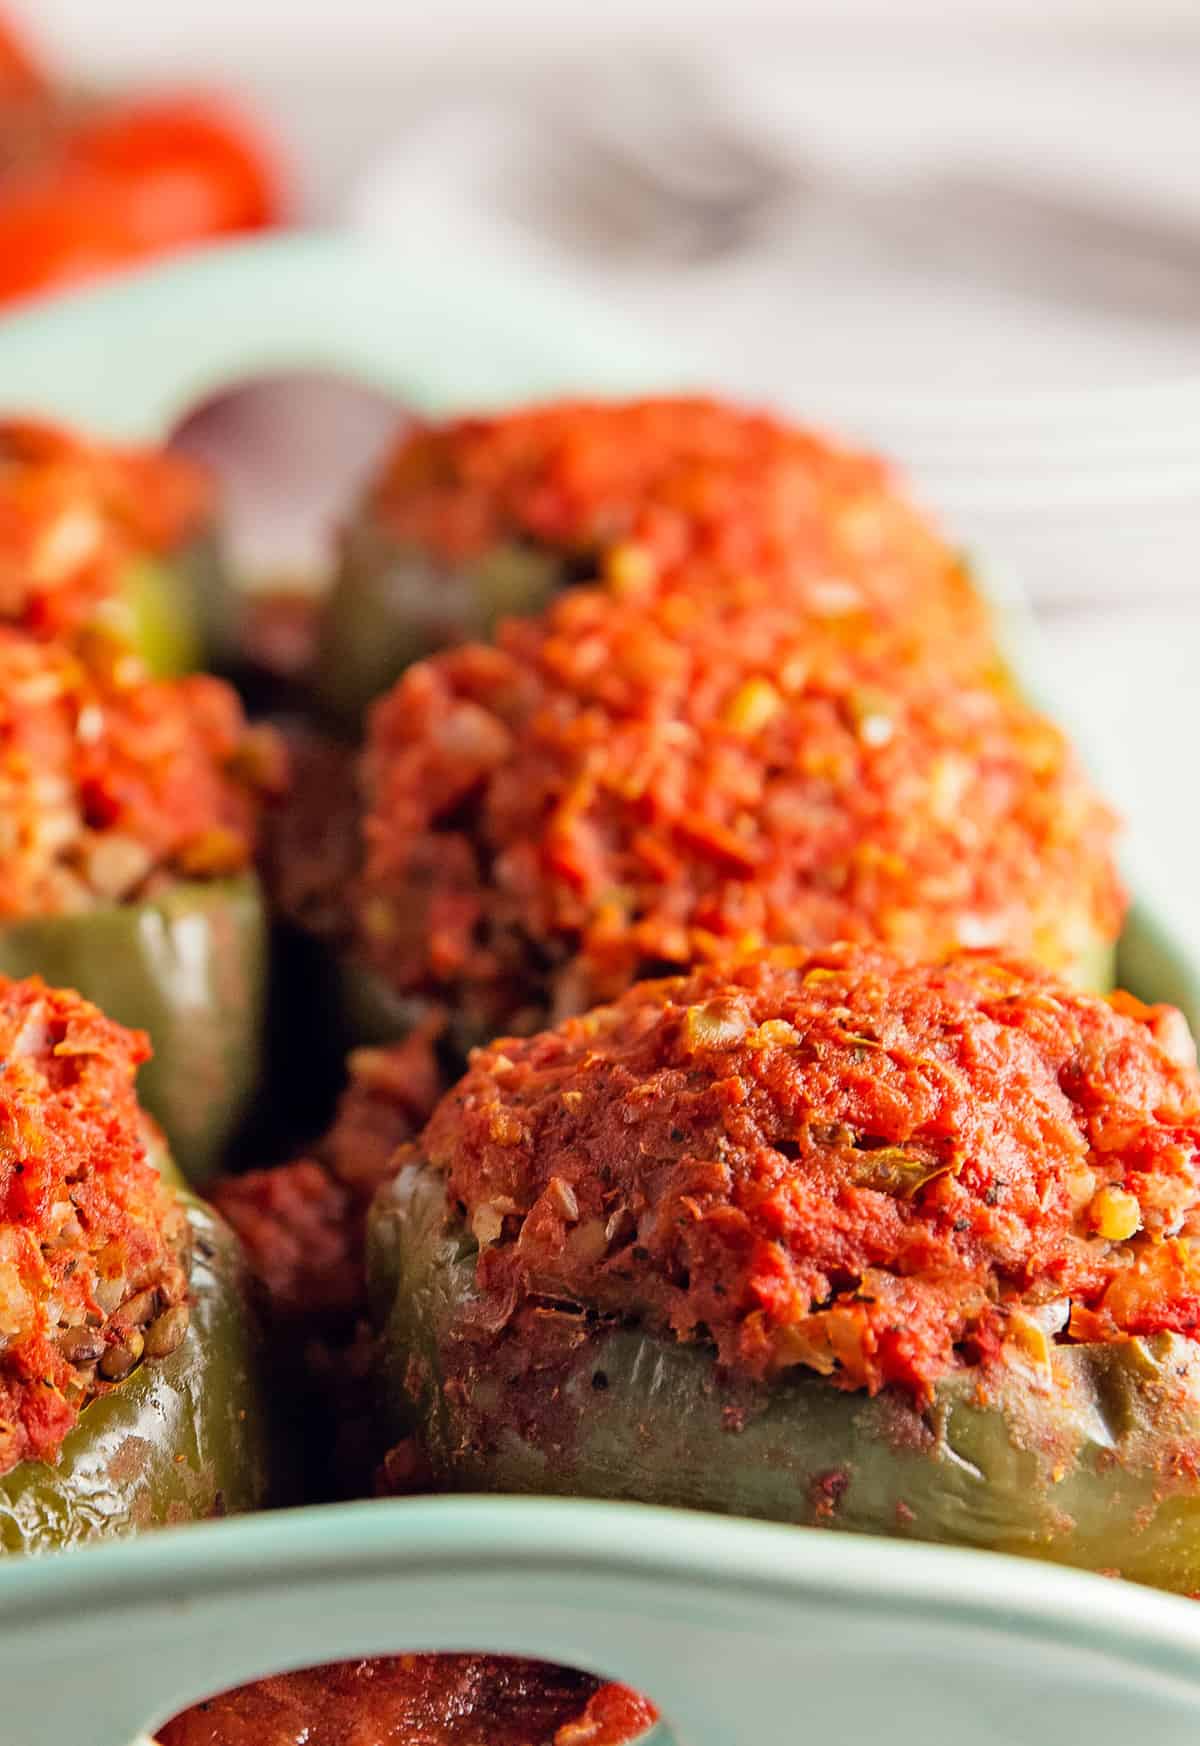 old fashioned stuffed peppers, stuffed peppers, peppers, bell peppers, recipe, stuffed pepper recipe, vegan, vegan recipe, whole food plant based recipe, whole food plant based, vegetarian, vegetarian recipe, gluten free, gluten free recipe, vegan dinner, vegan meals, vegetarian dinner, vegetarian meal, whole food plant based dinner, whole food plant based meal, gluten free dinner, gluten free meal, healthy, oil free, no oil, tomatoes, rice, lentils, mashed potatoes, red gravy, tomato gravy, entertaining, wfpb, dairy free, no dairy, traditional, American, classic, delicious, the best, winter, fall, spring, summer